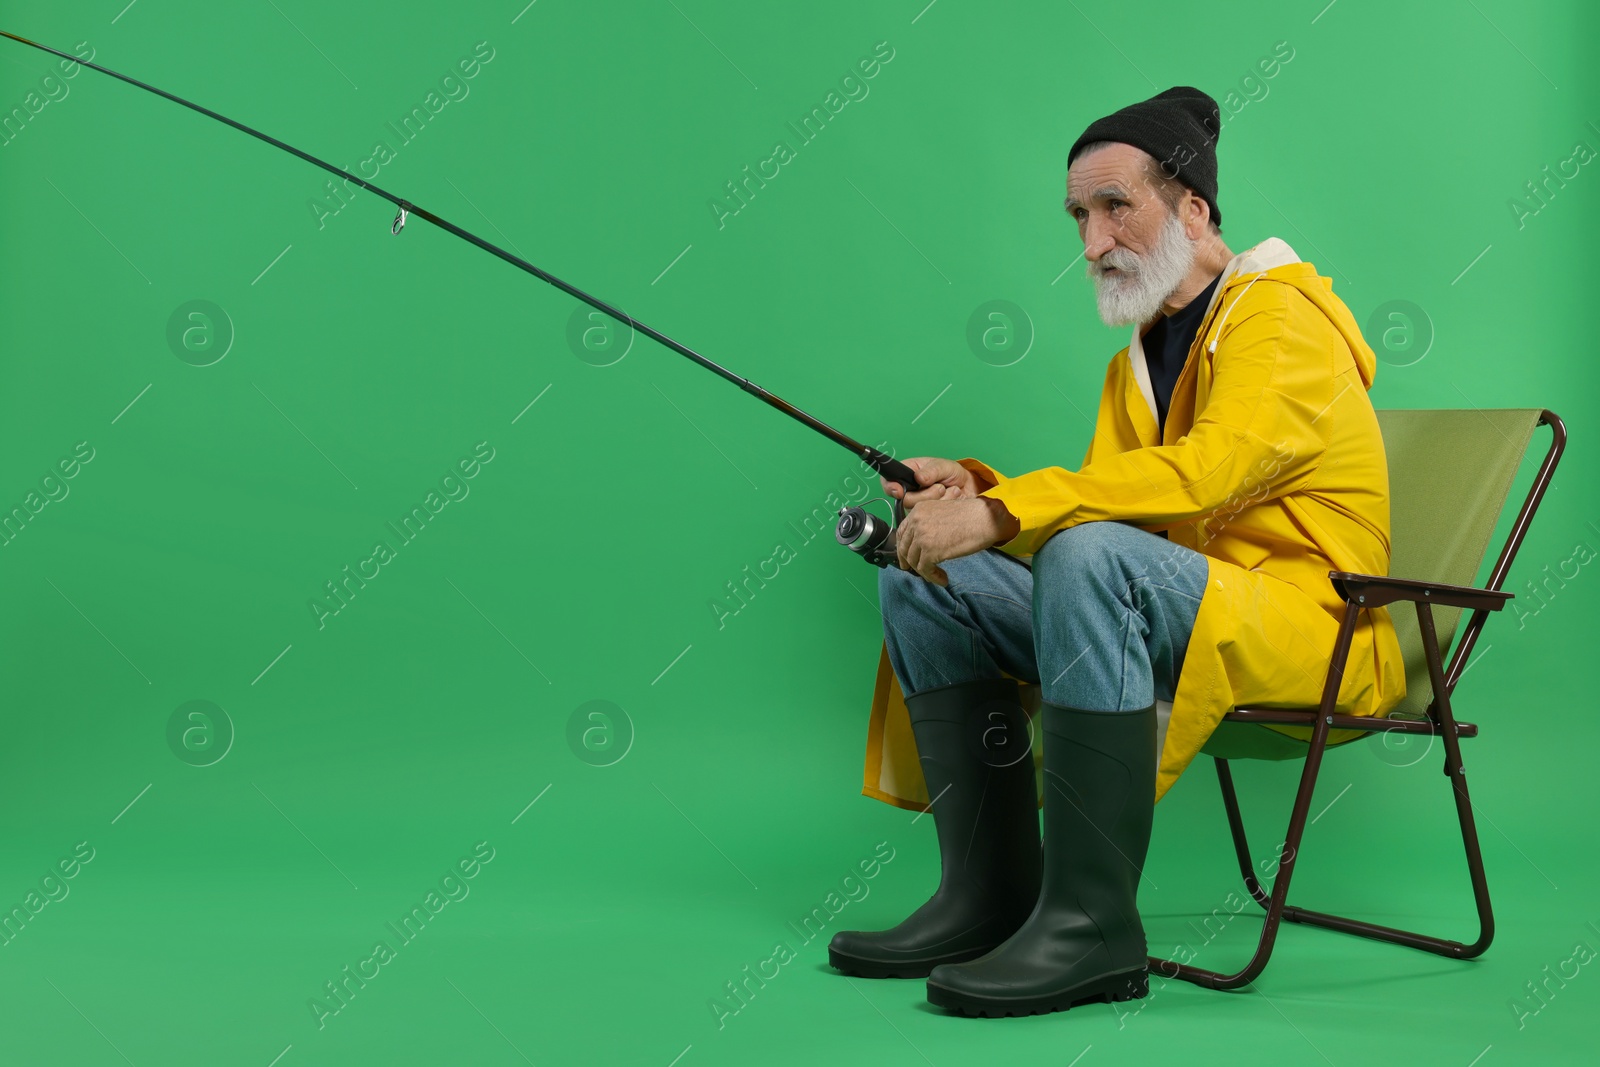 Photo of Fisherman with rod on chair against green background